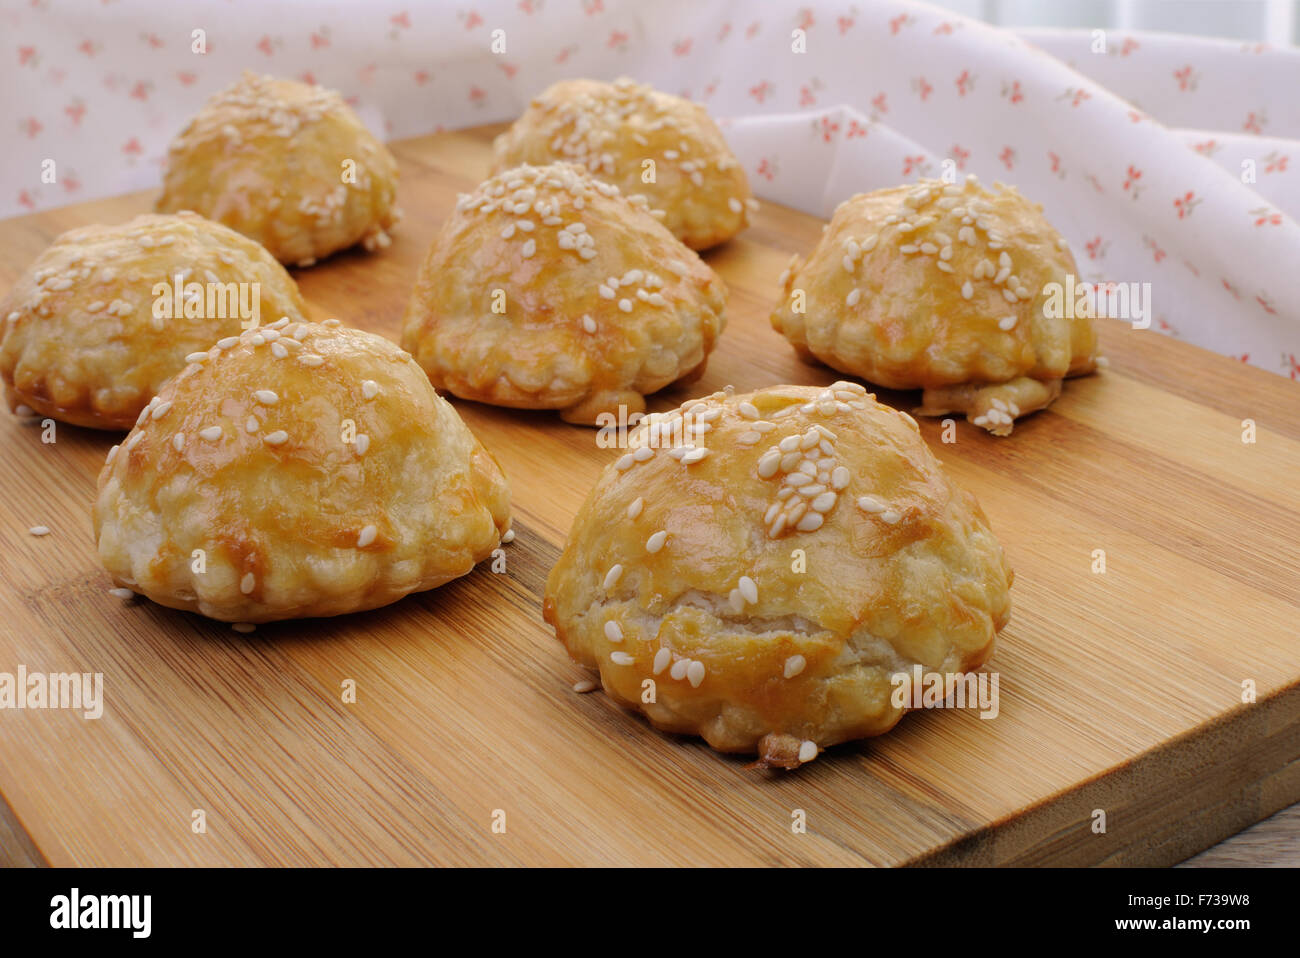 Bun puff pastry with sesame seeds on a wooden board Stock Photo